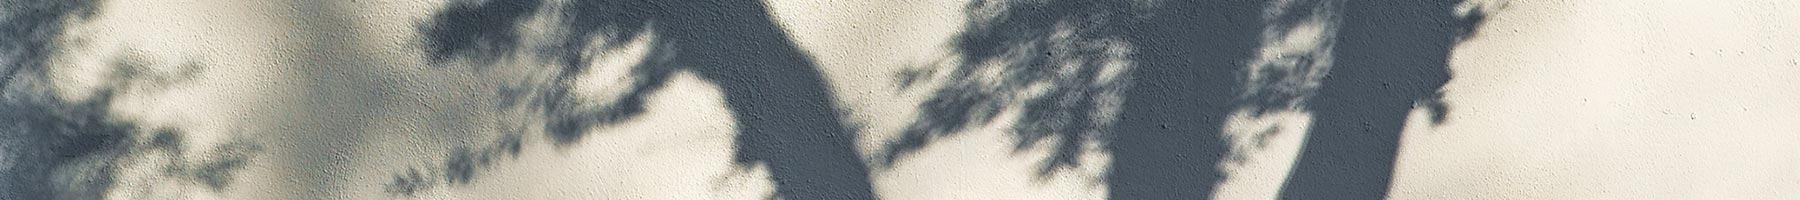 shadow of a tree